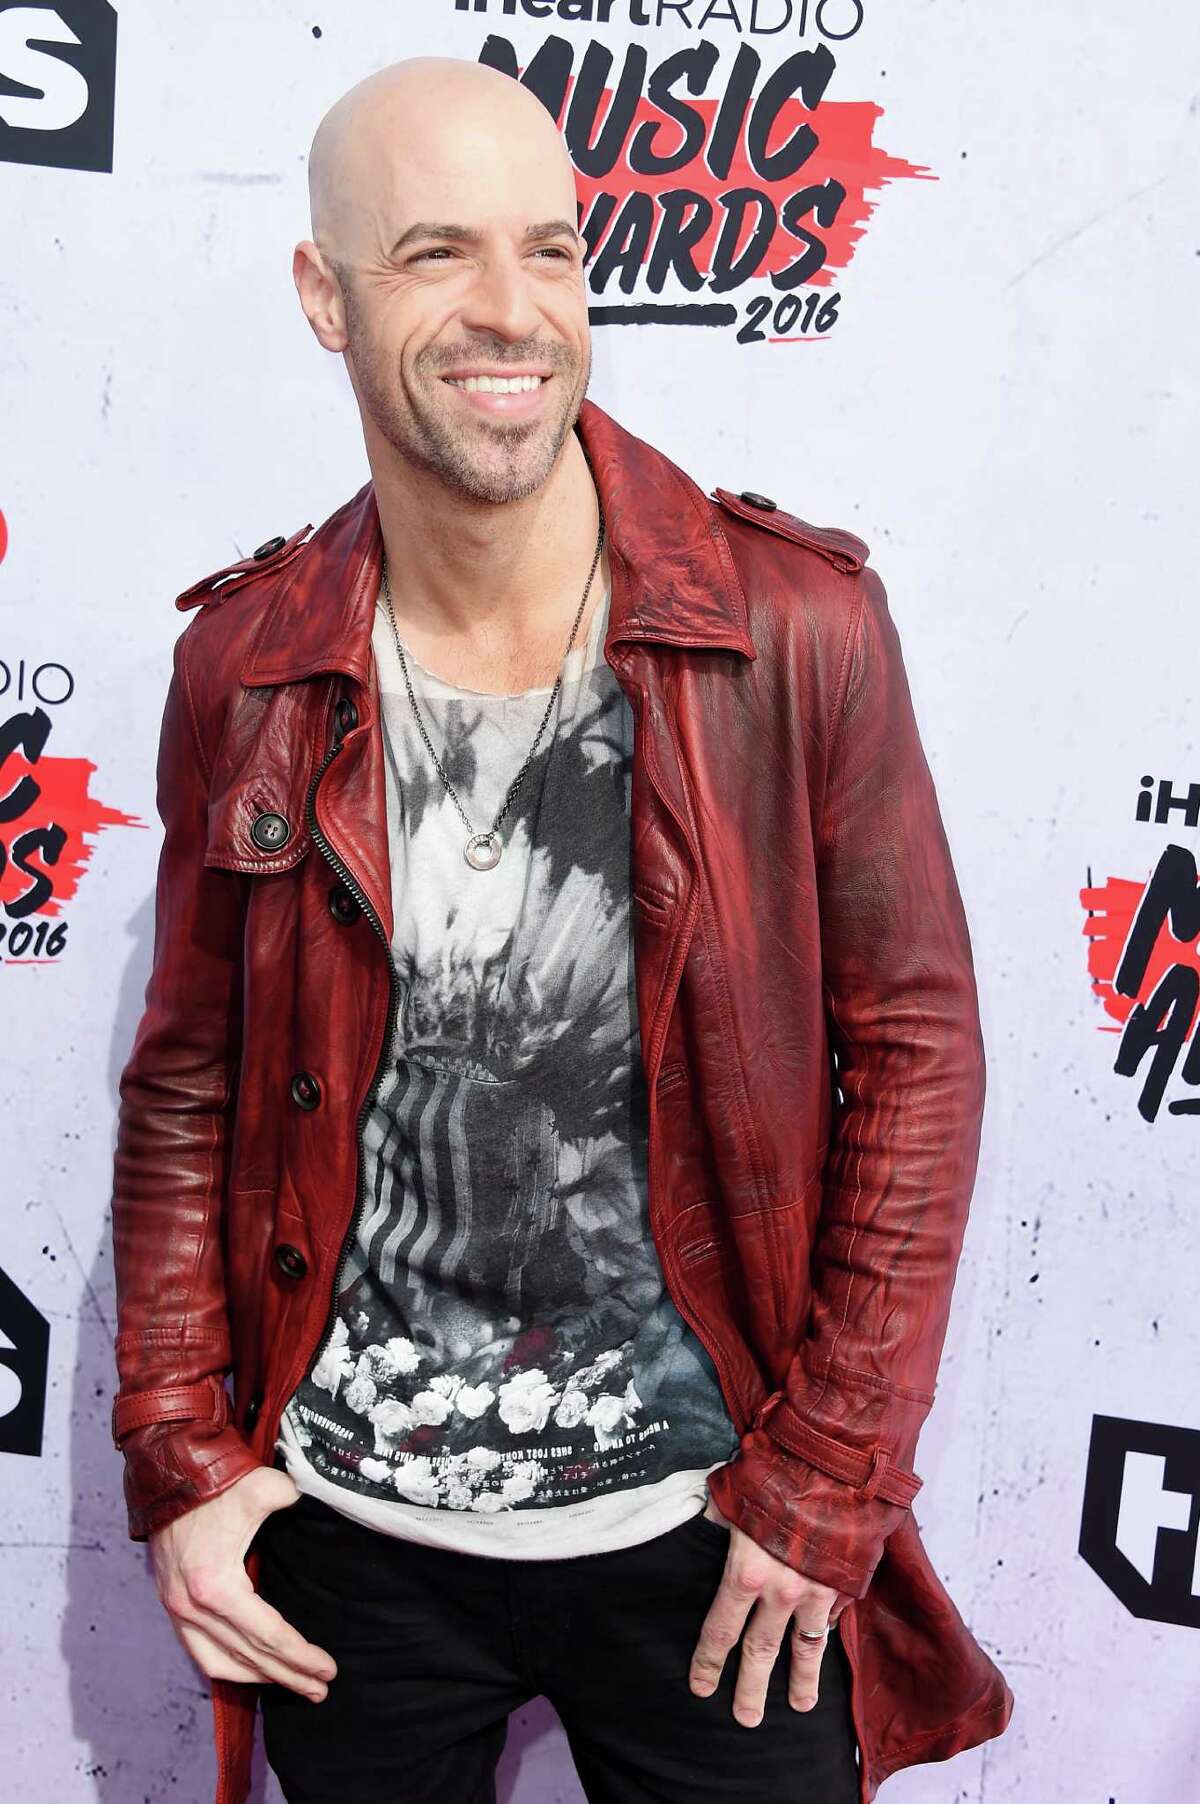 INGLEWOOD, CALIFORNIA - APRIL 03: Recording artist Chris Daughtry attends the iHeartRadio Music Awards at The Forum on April 3, 2016 in Inglewood, California. (Photo by Steve Granitz/WireImage)